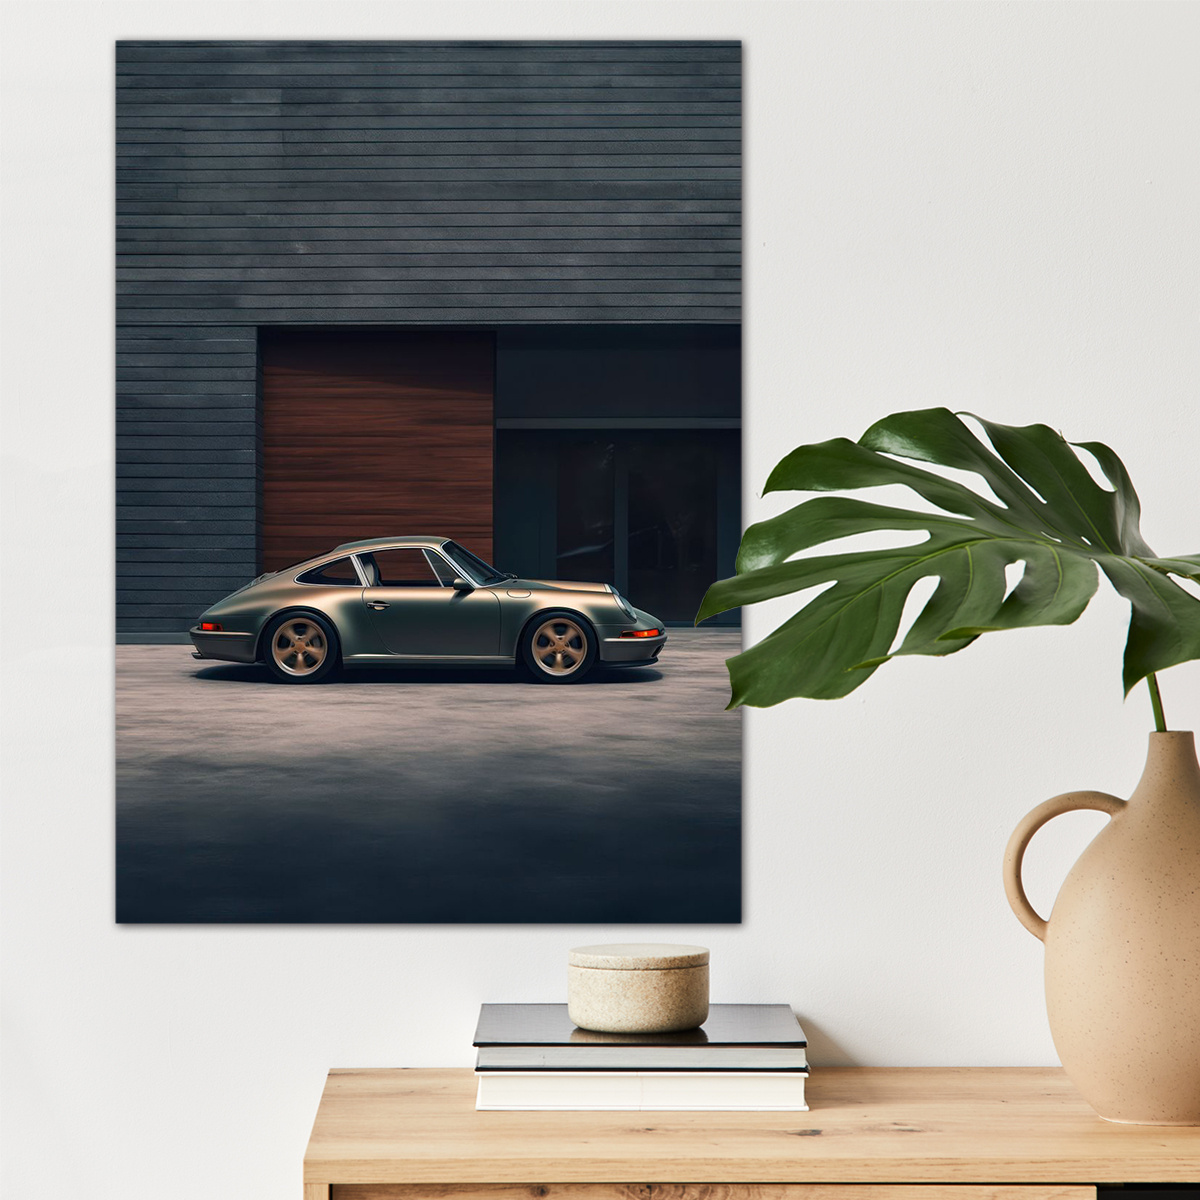 

1pc Sports Car Poster Canvas Wall Art For Home Decor, Car Lovers Poster Wall Decor Roadster Canvas Prints For Living Room Bedroom Kitchen Office Cafe Decor, Perfect Gift And Decoration